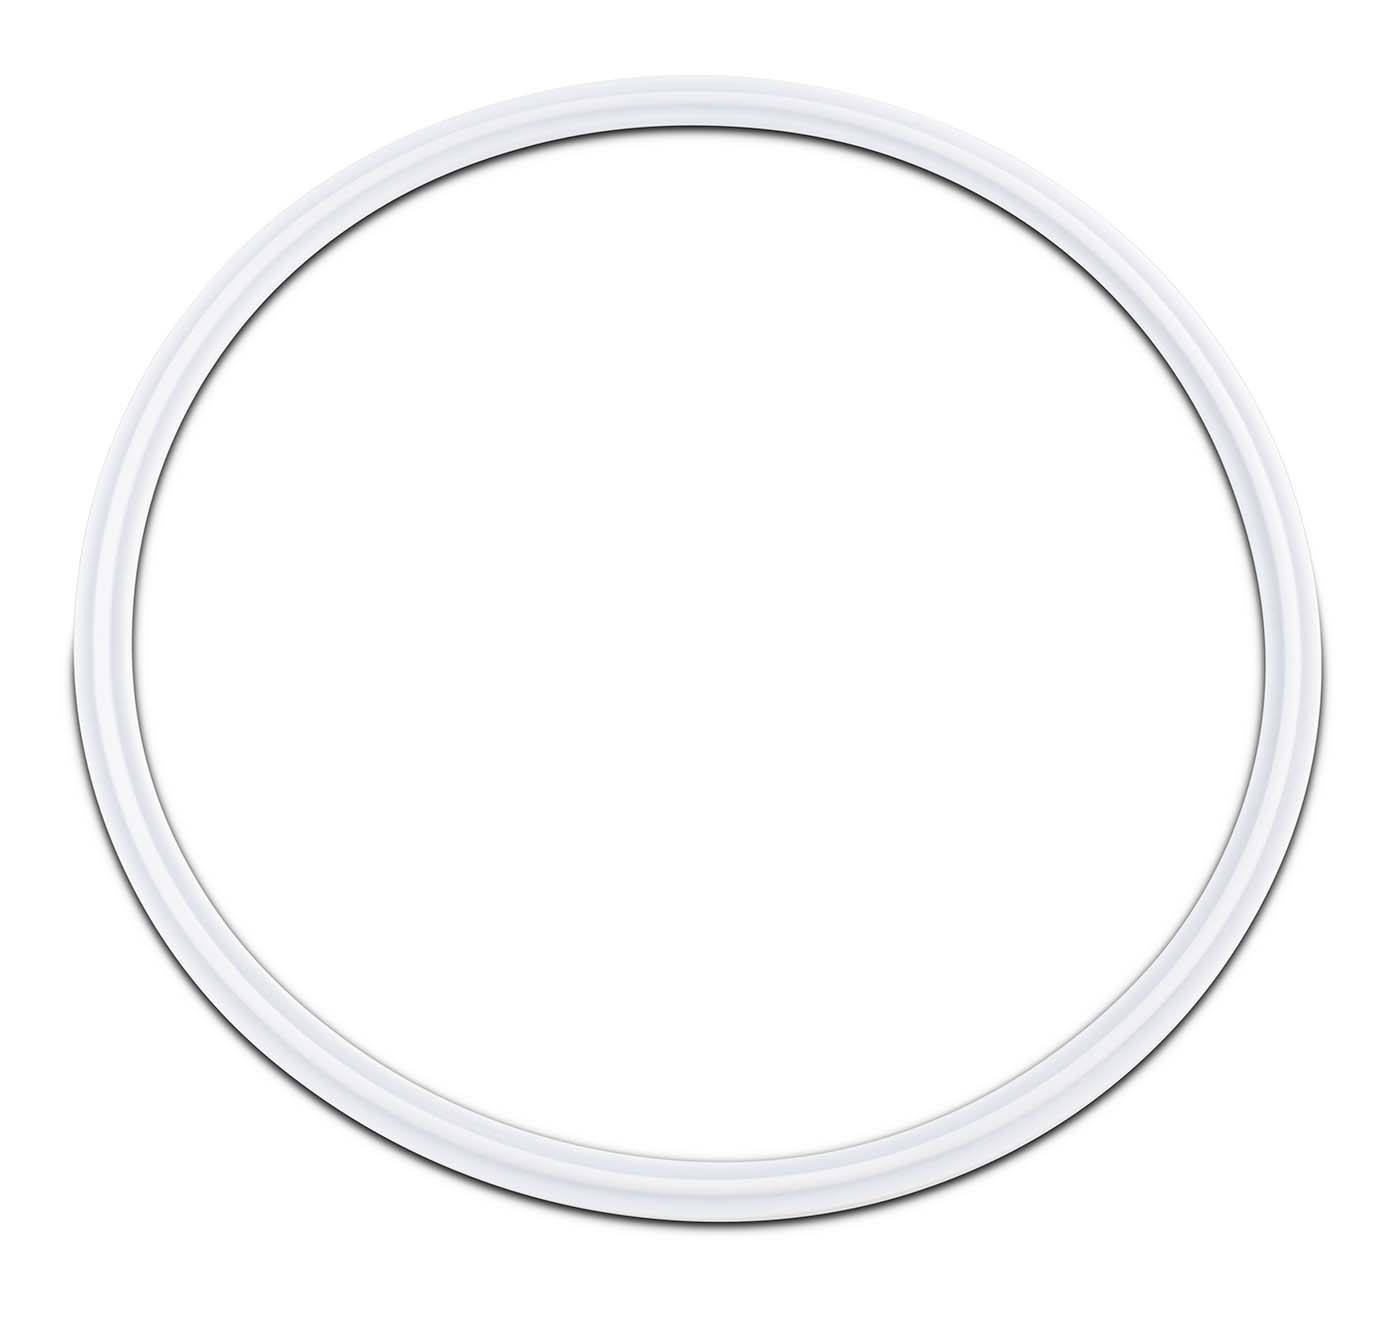 PTFE Envelope Tri-Clamp Gaskets with Viton Filler Shop All Categories BVV 8-inch